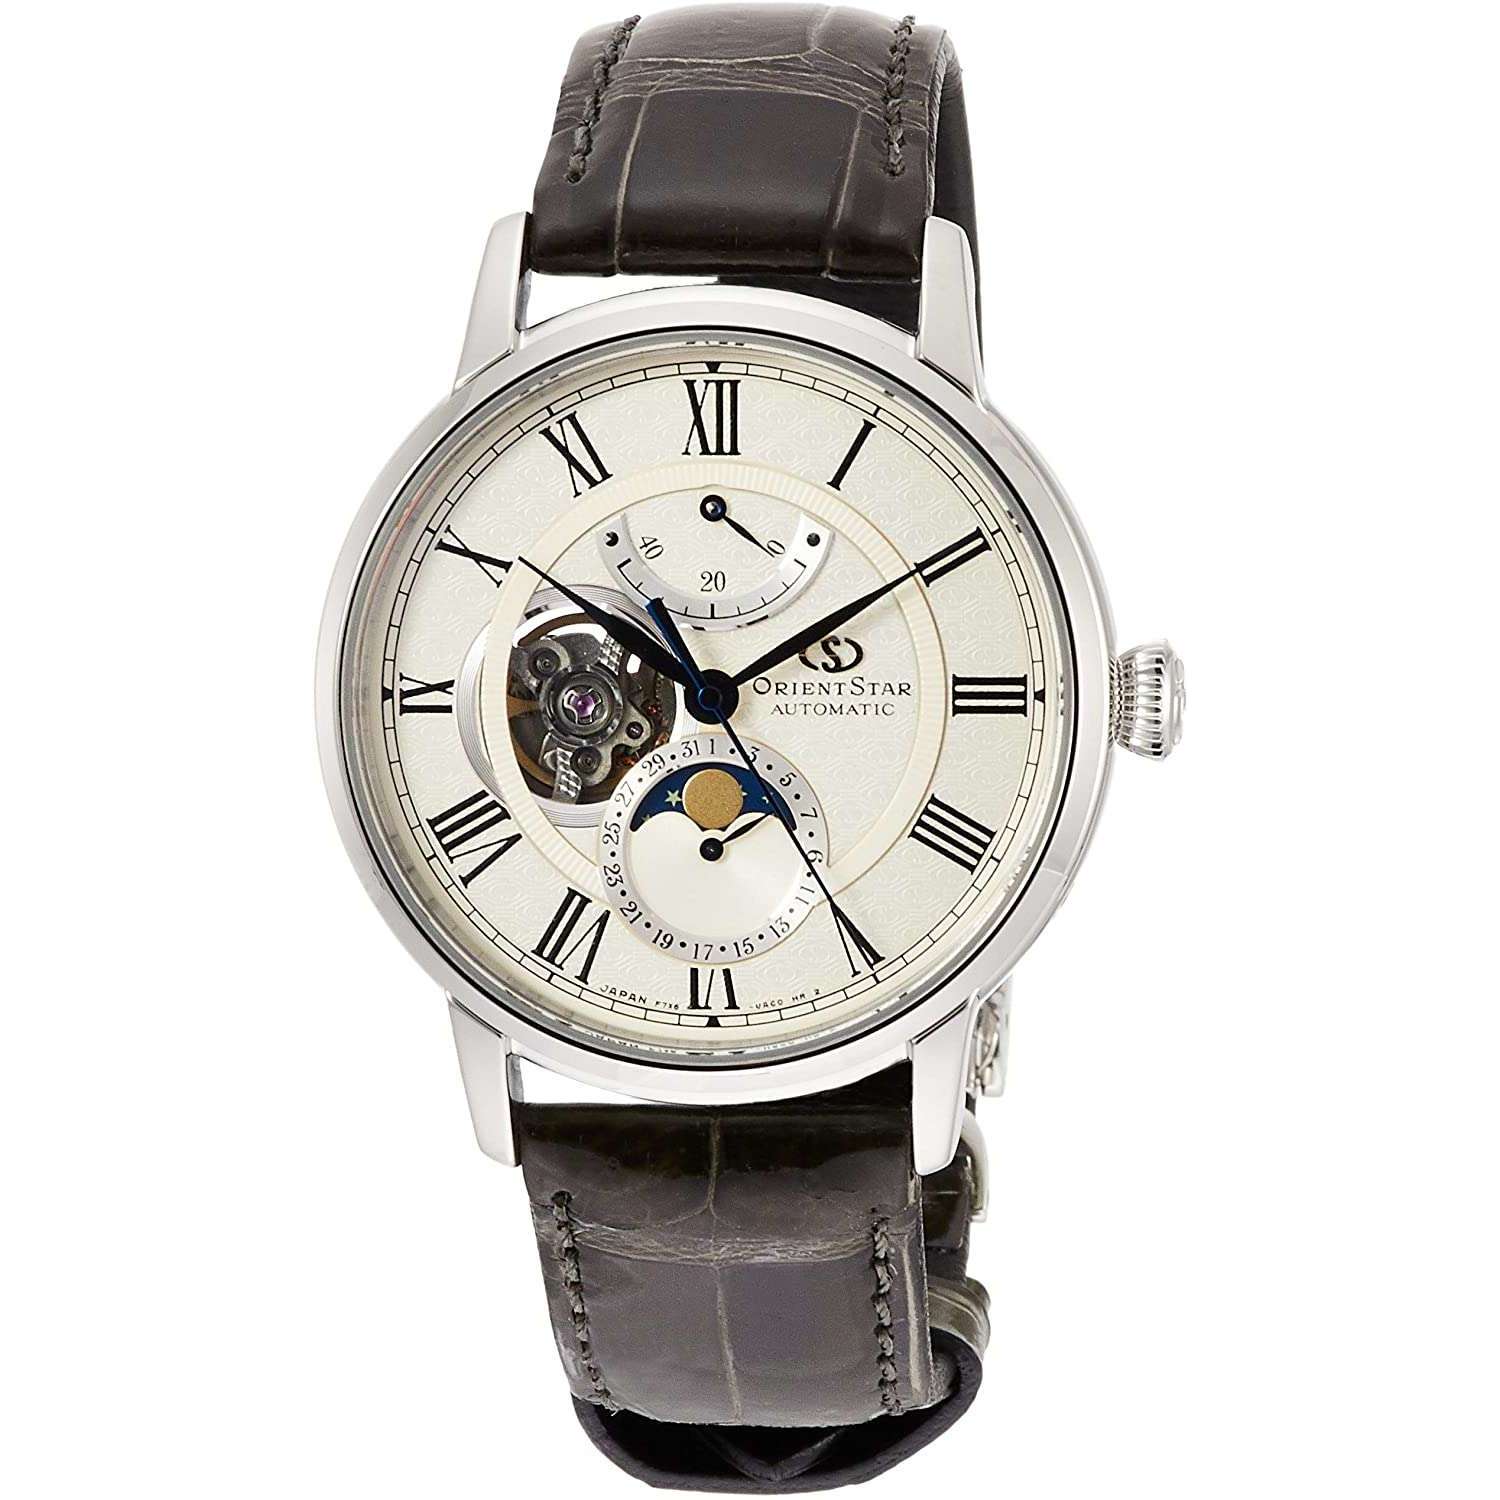 ROOK JAPAN:ORIENT STAR CLASSIC COLLECTION MECHANICAL MOON PHASE MEN WATCH (500 LIMITED) RK-AM0007S,JDM Watch,Orient Star Mechanical Moon Phase